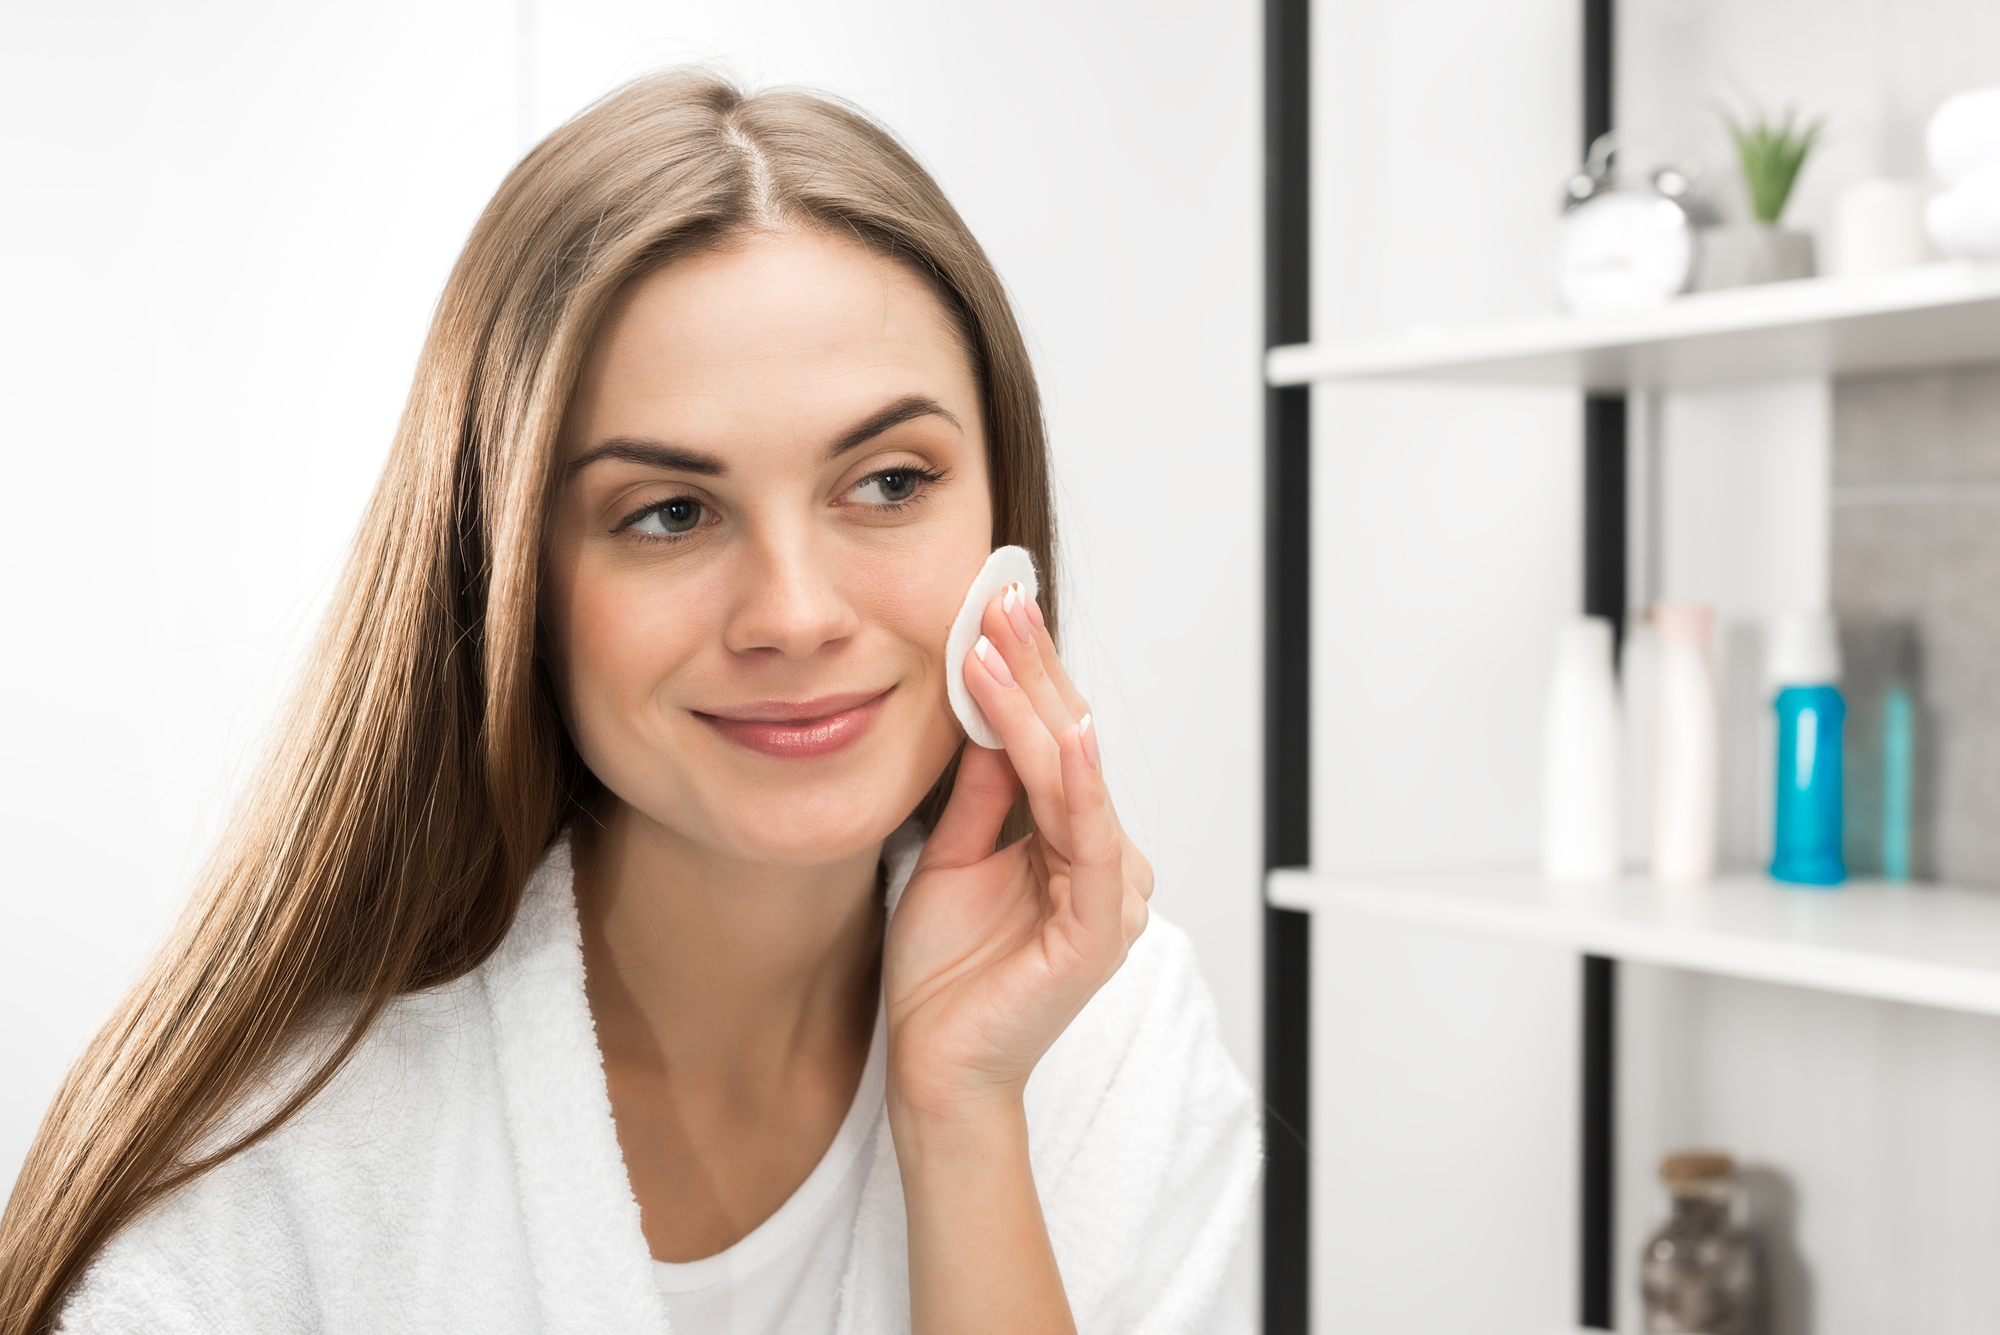 Preparing skin for makeup – how to do it?